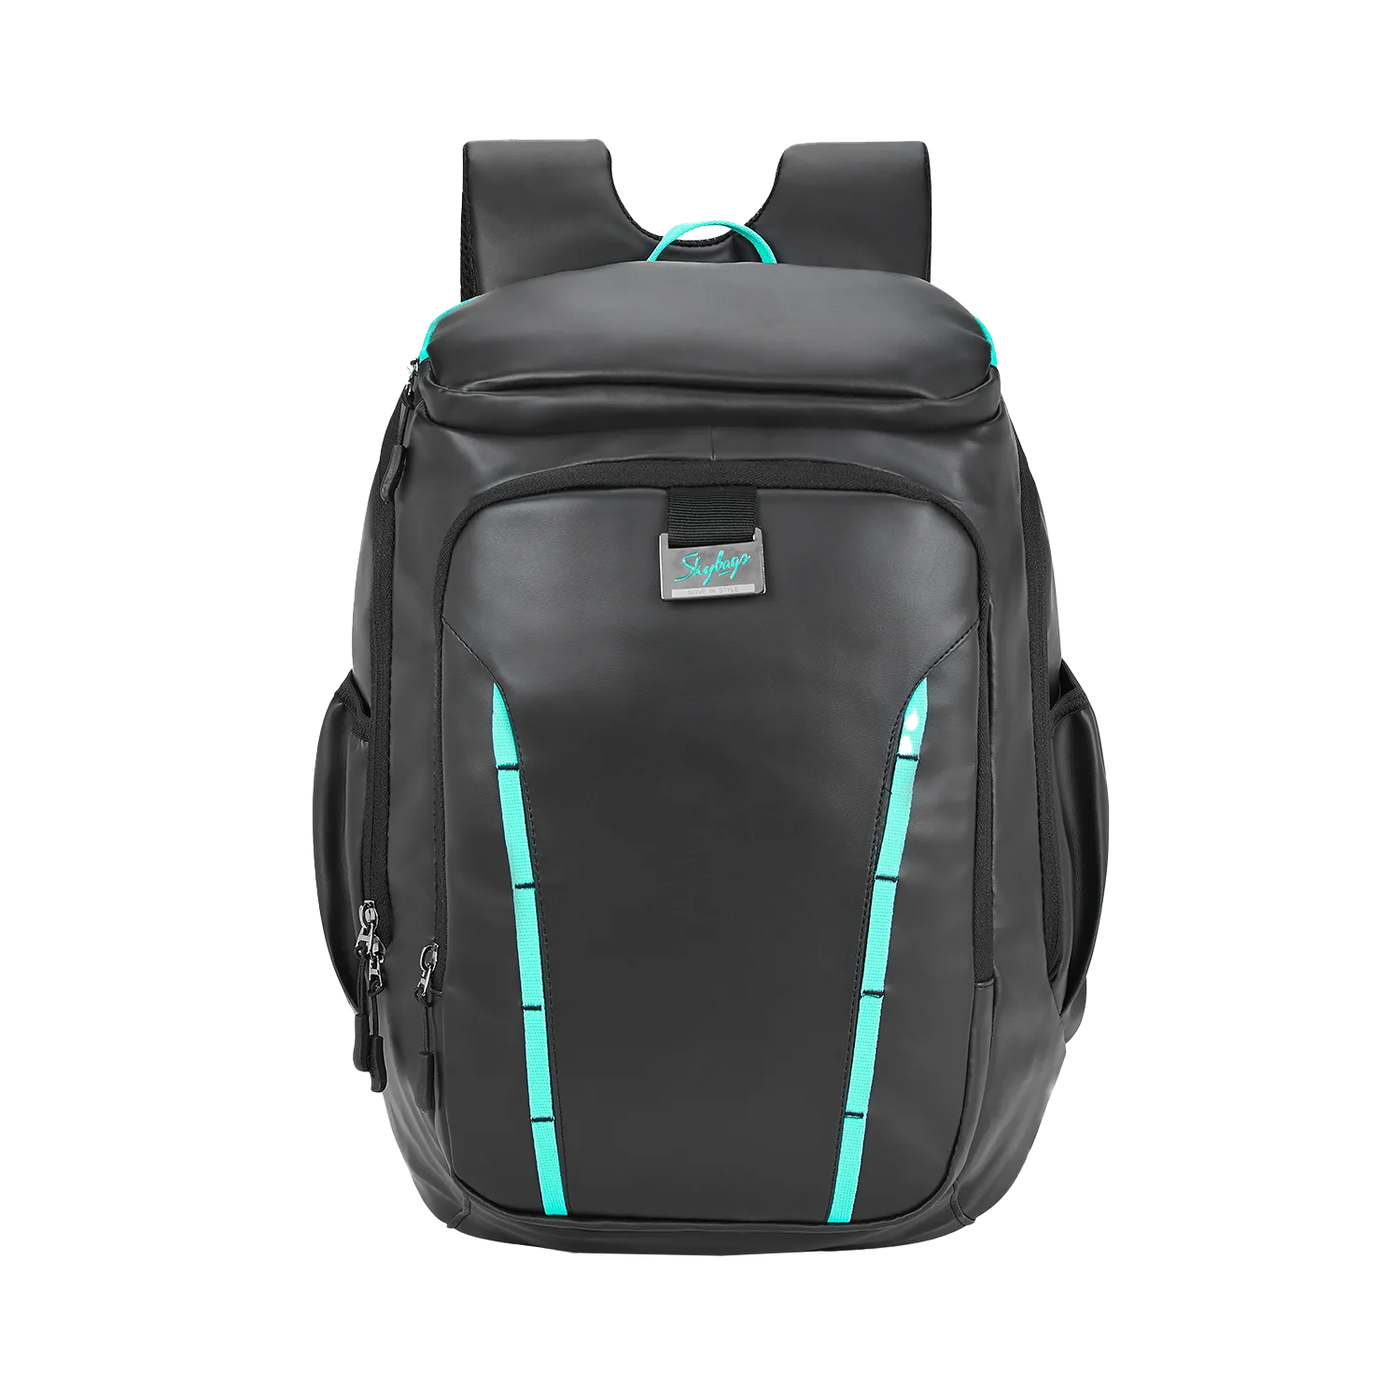 Buy SKYBAGS BOOST 02 LAPTOP BACKPACK 2017 at Amazon.in